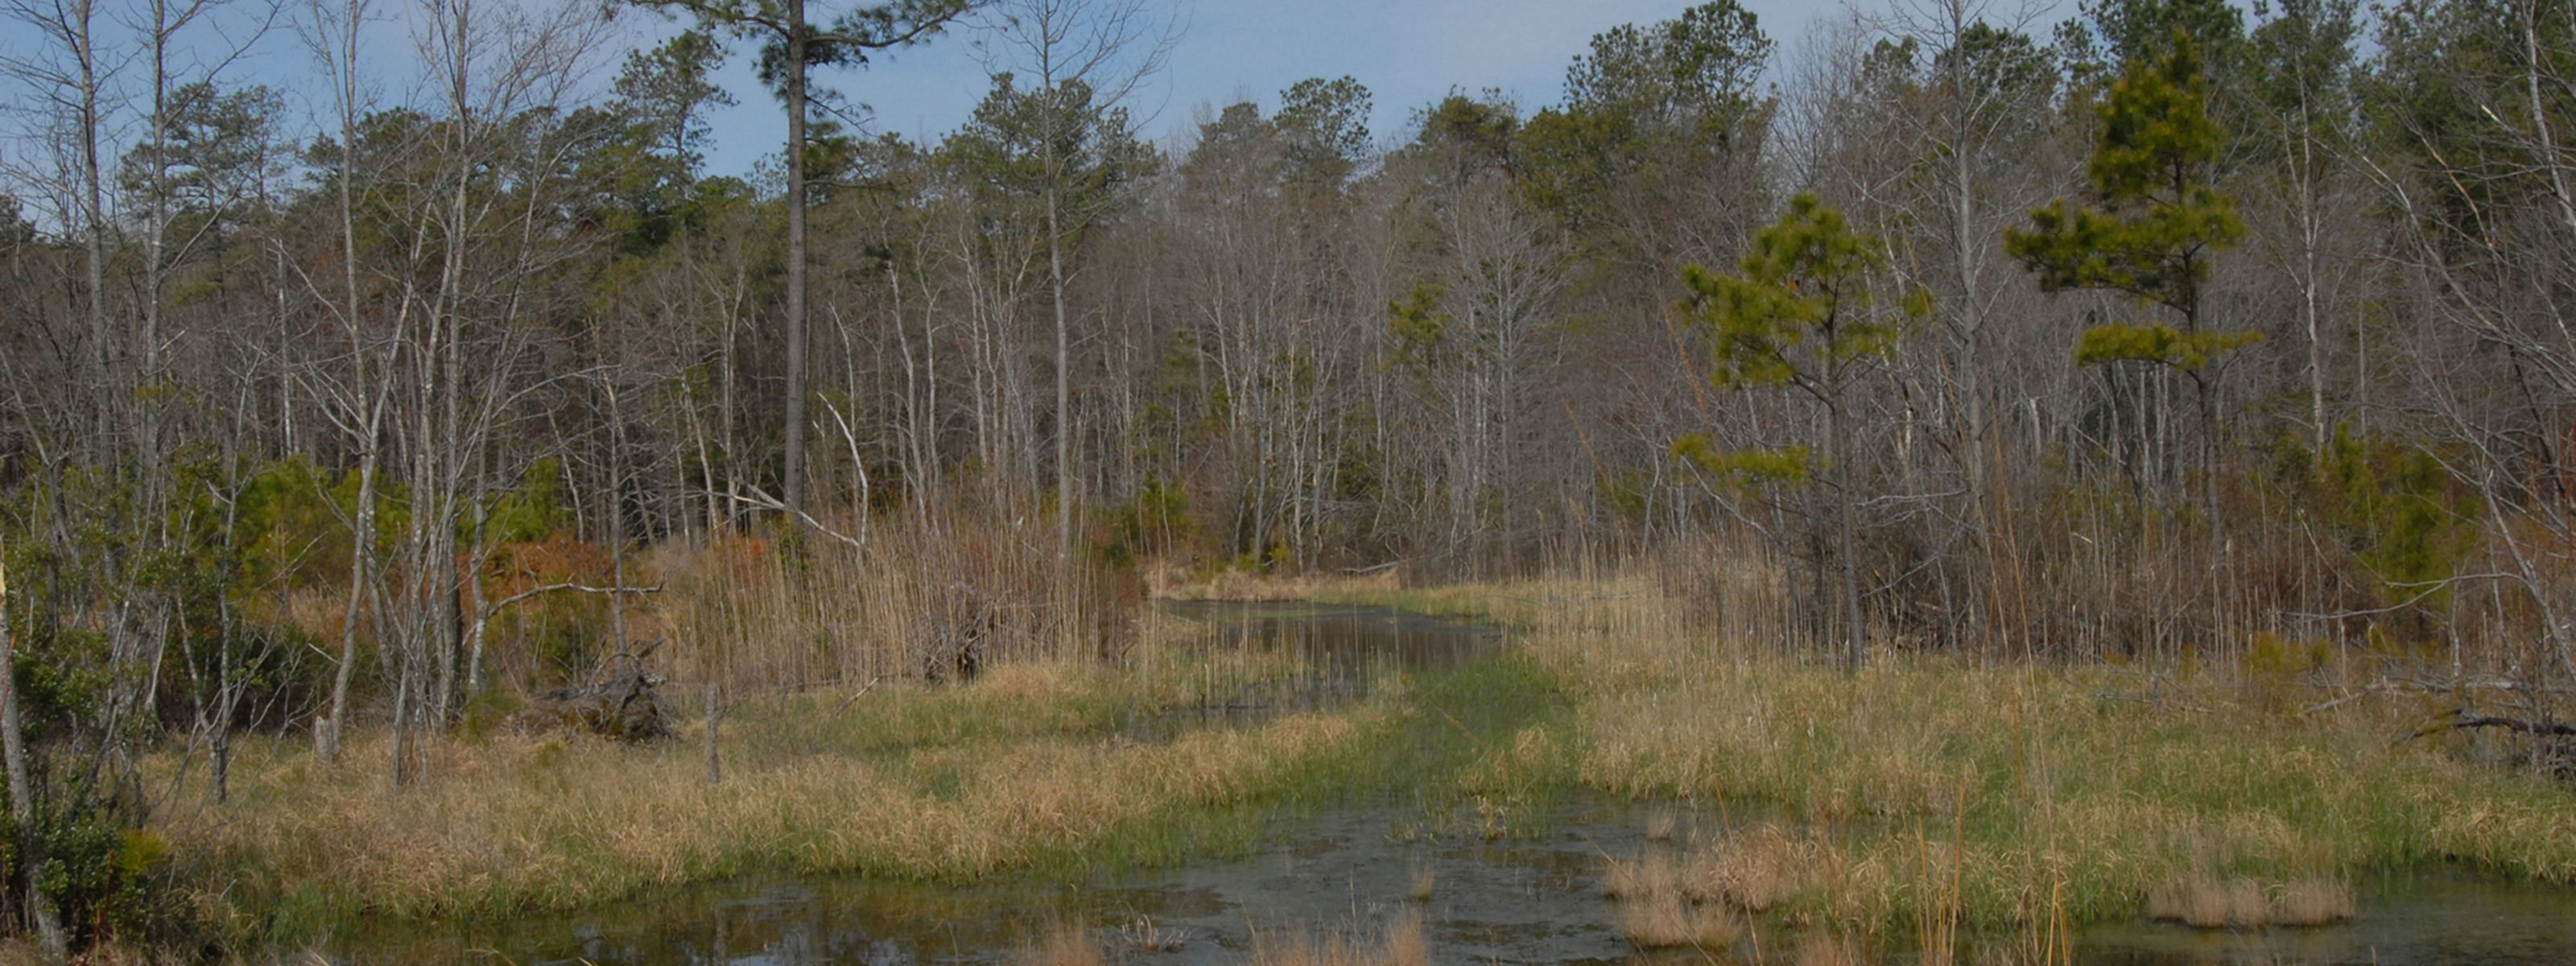 A view of a wetland marsh surrounded by bare trees.